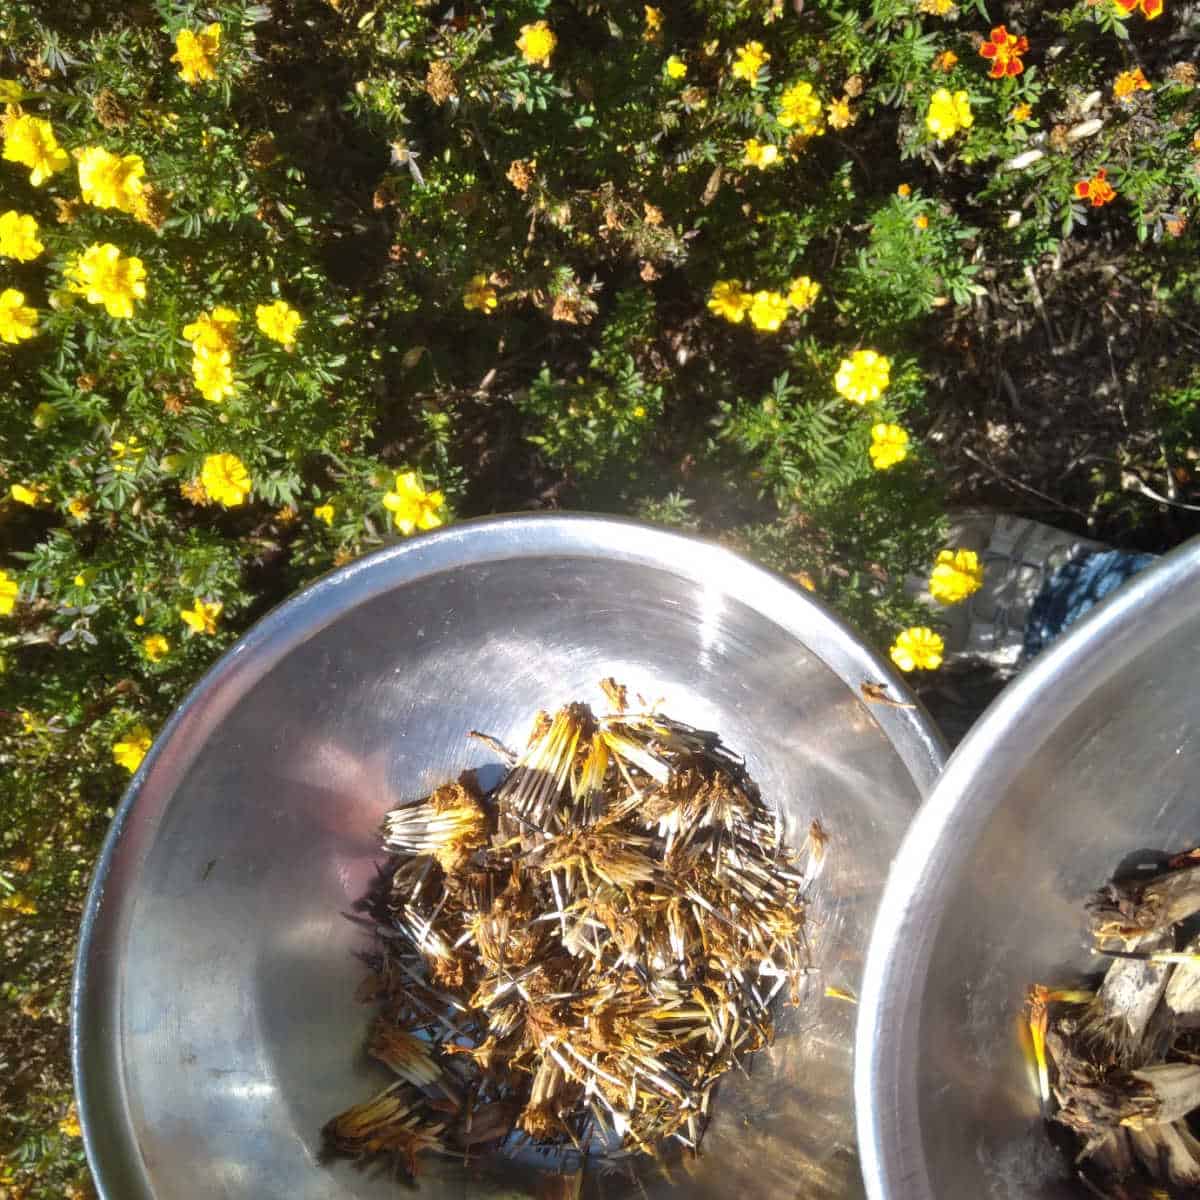 yellow marigolds and a silver bowl holding marigold seeds